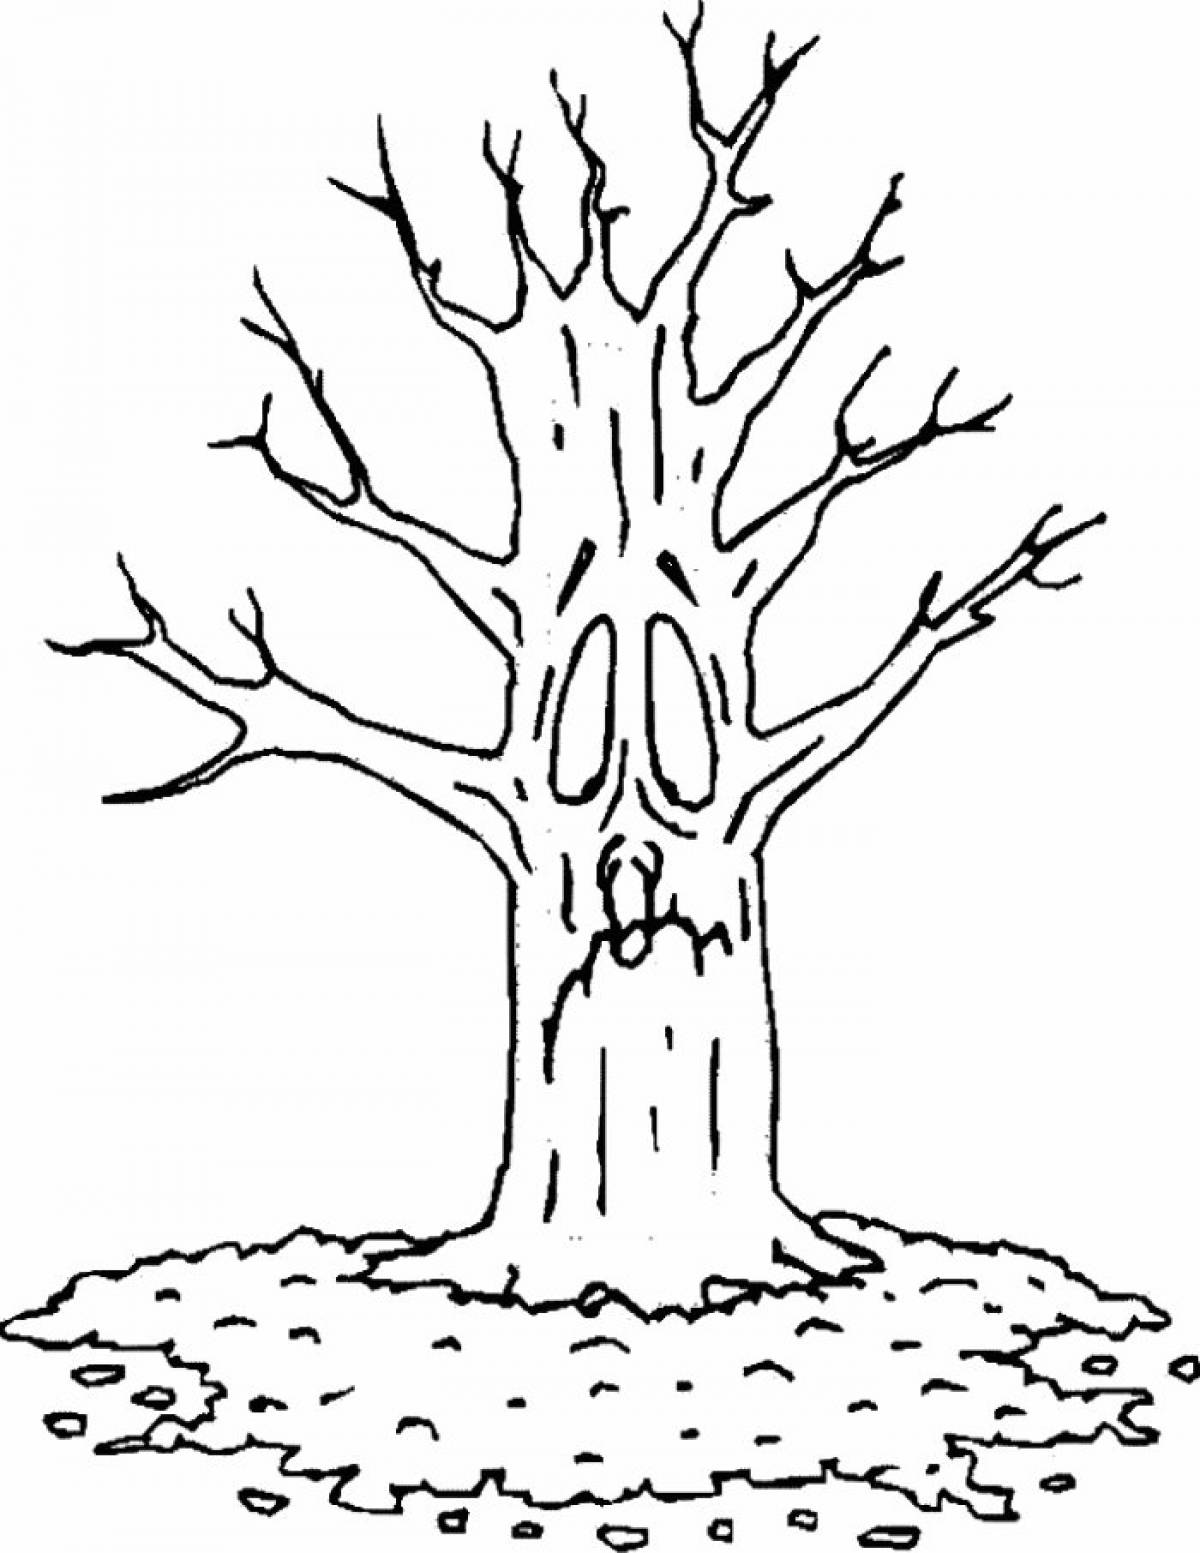 Coloring sad tree without leaves